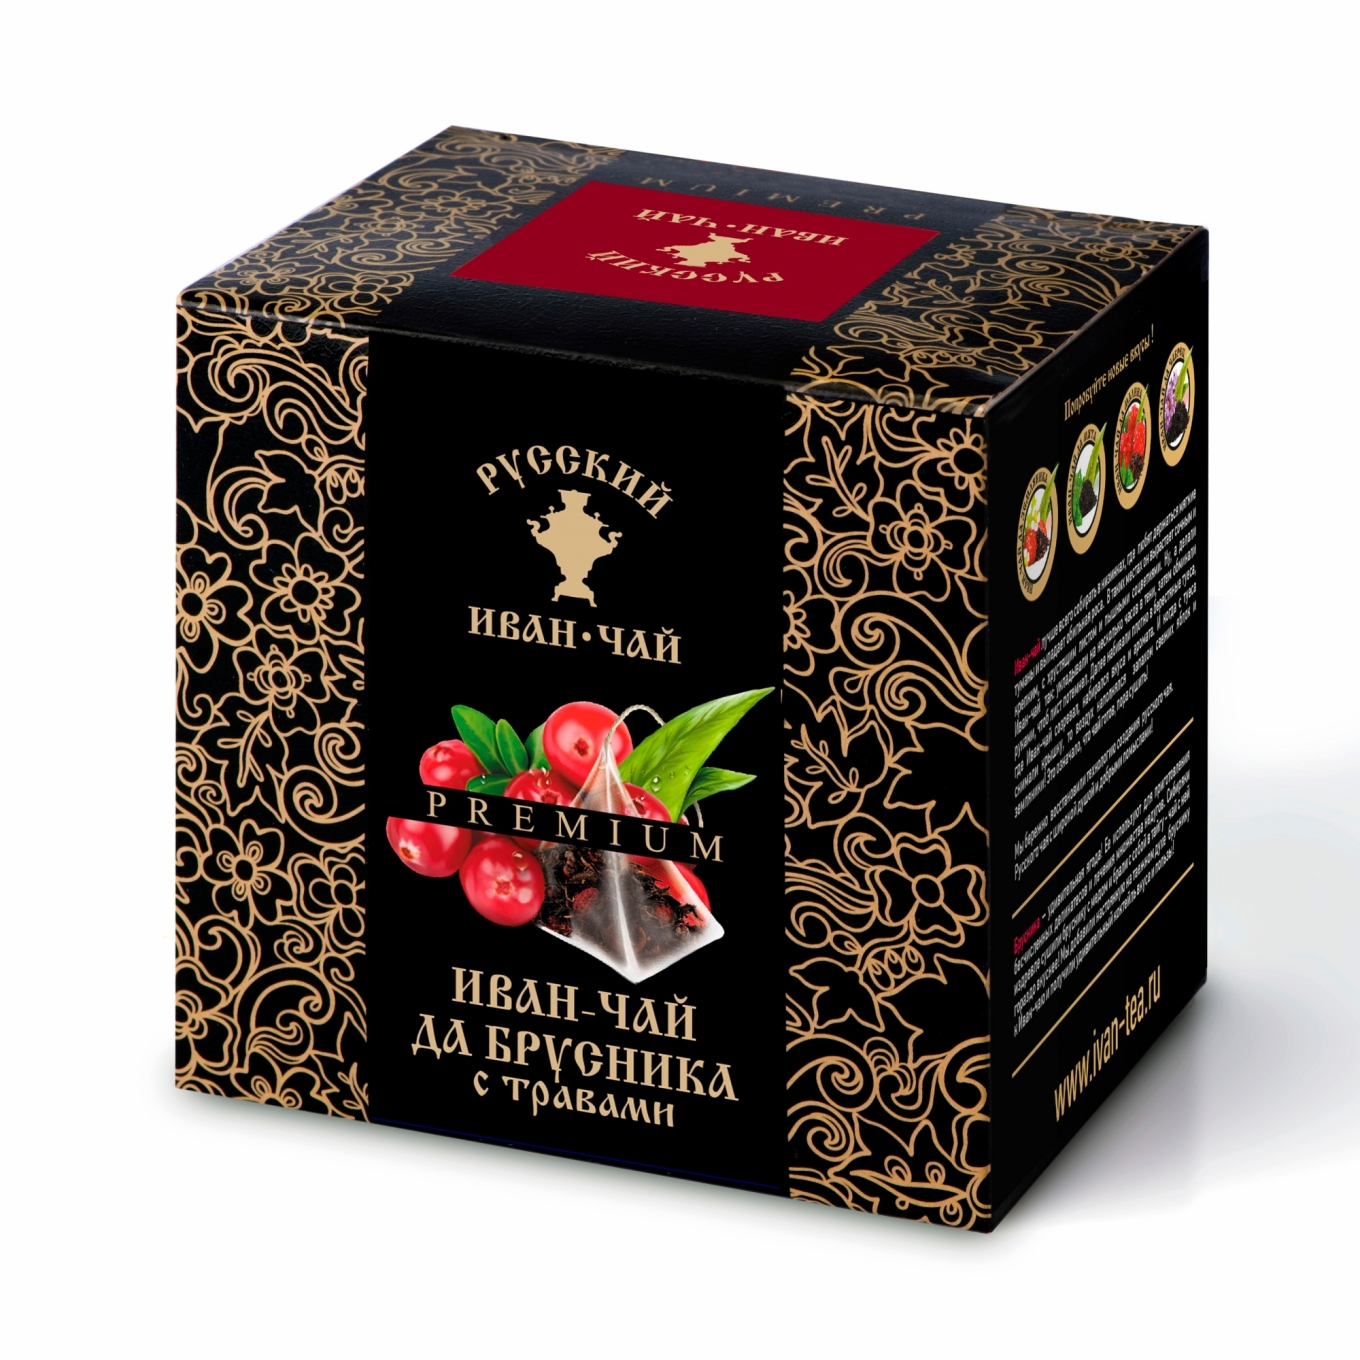 Premium Ivan-Tea and Lingonberry with Herbs, 12 pyramids